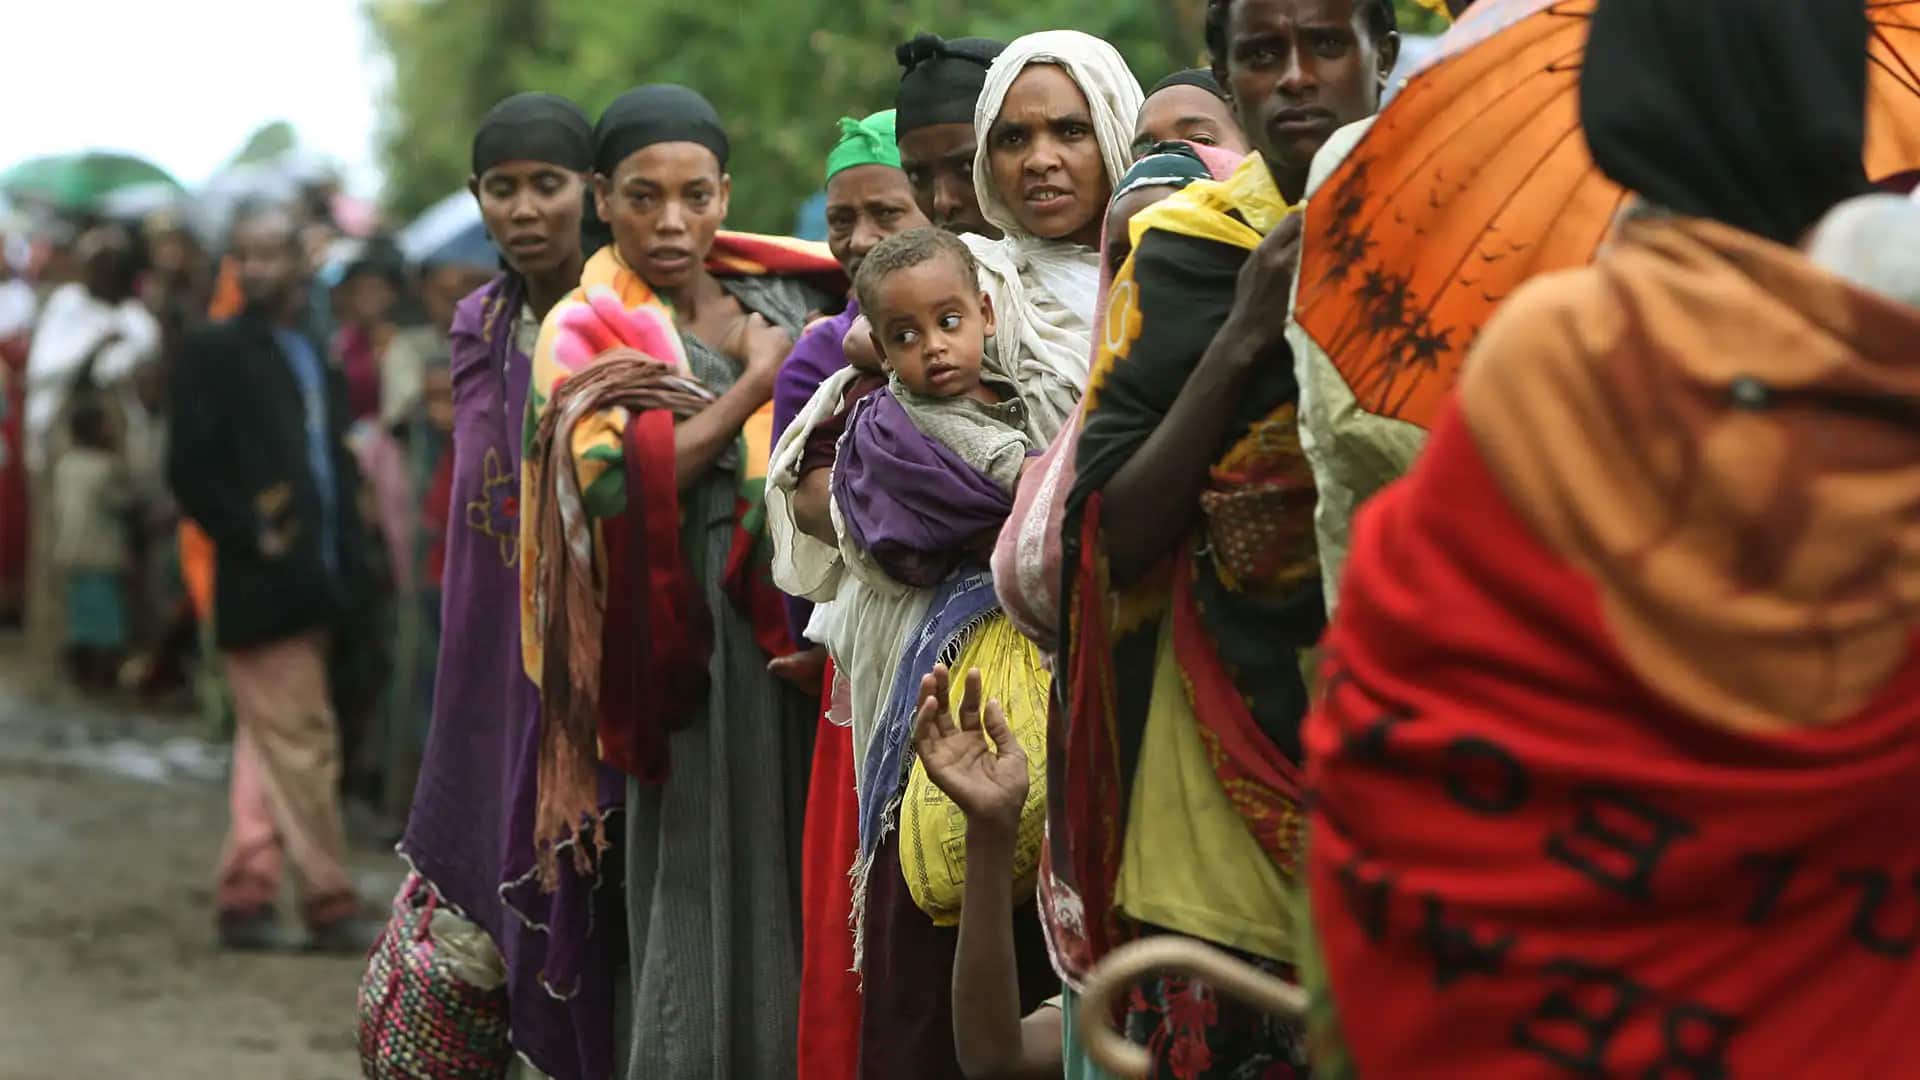 Ethiopia's unforgettable famines: Here's why they really happen